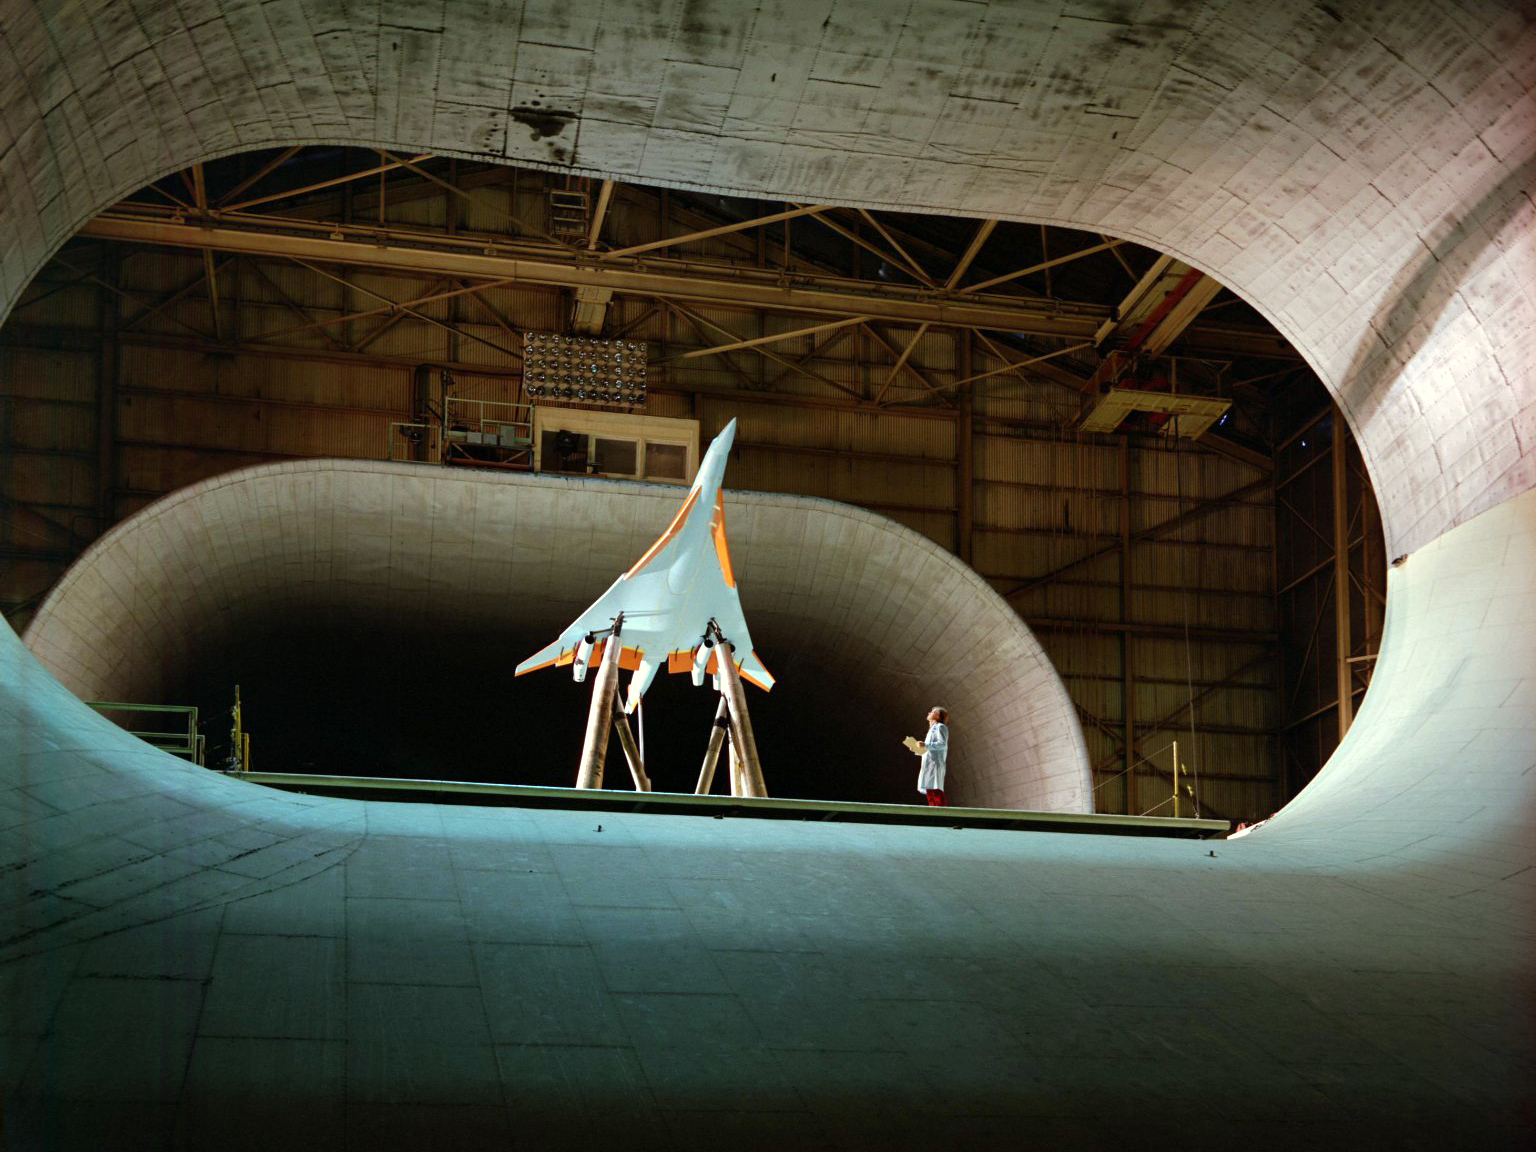 This is a photo of a supersonic Cruise Aircraft Research program model in wind tunnel testing.